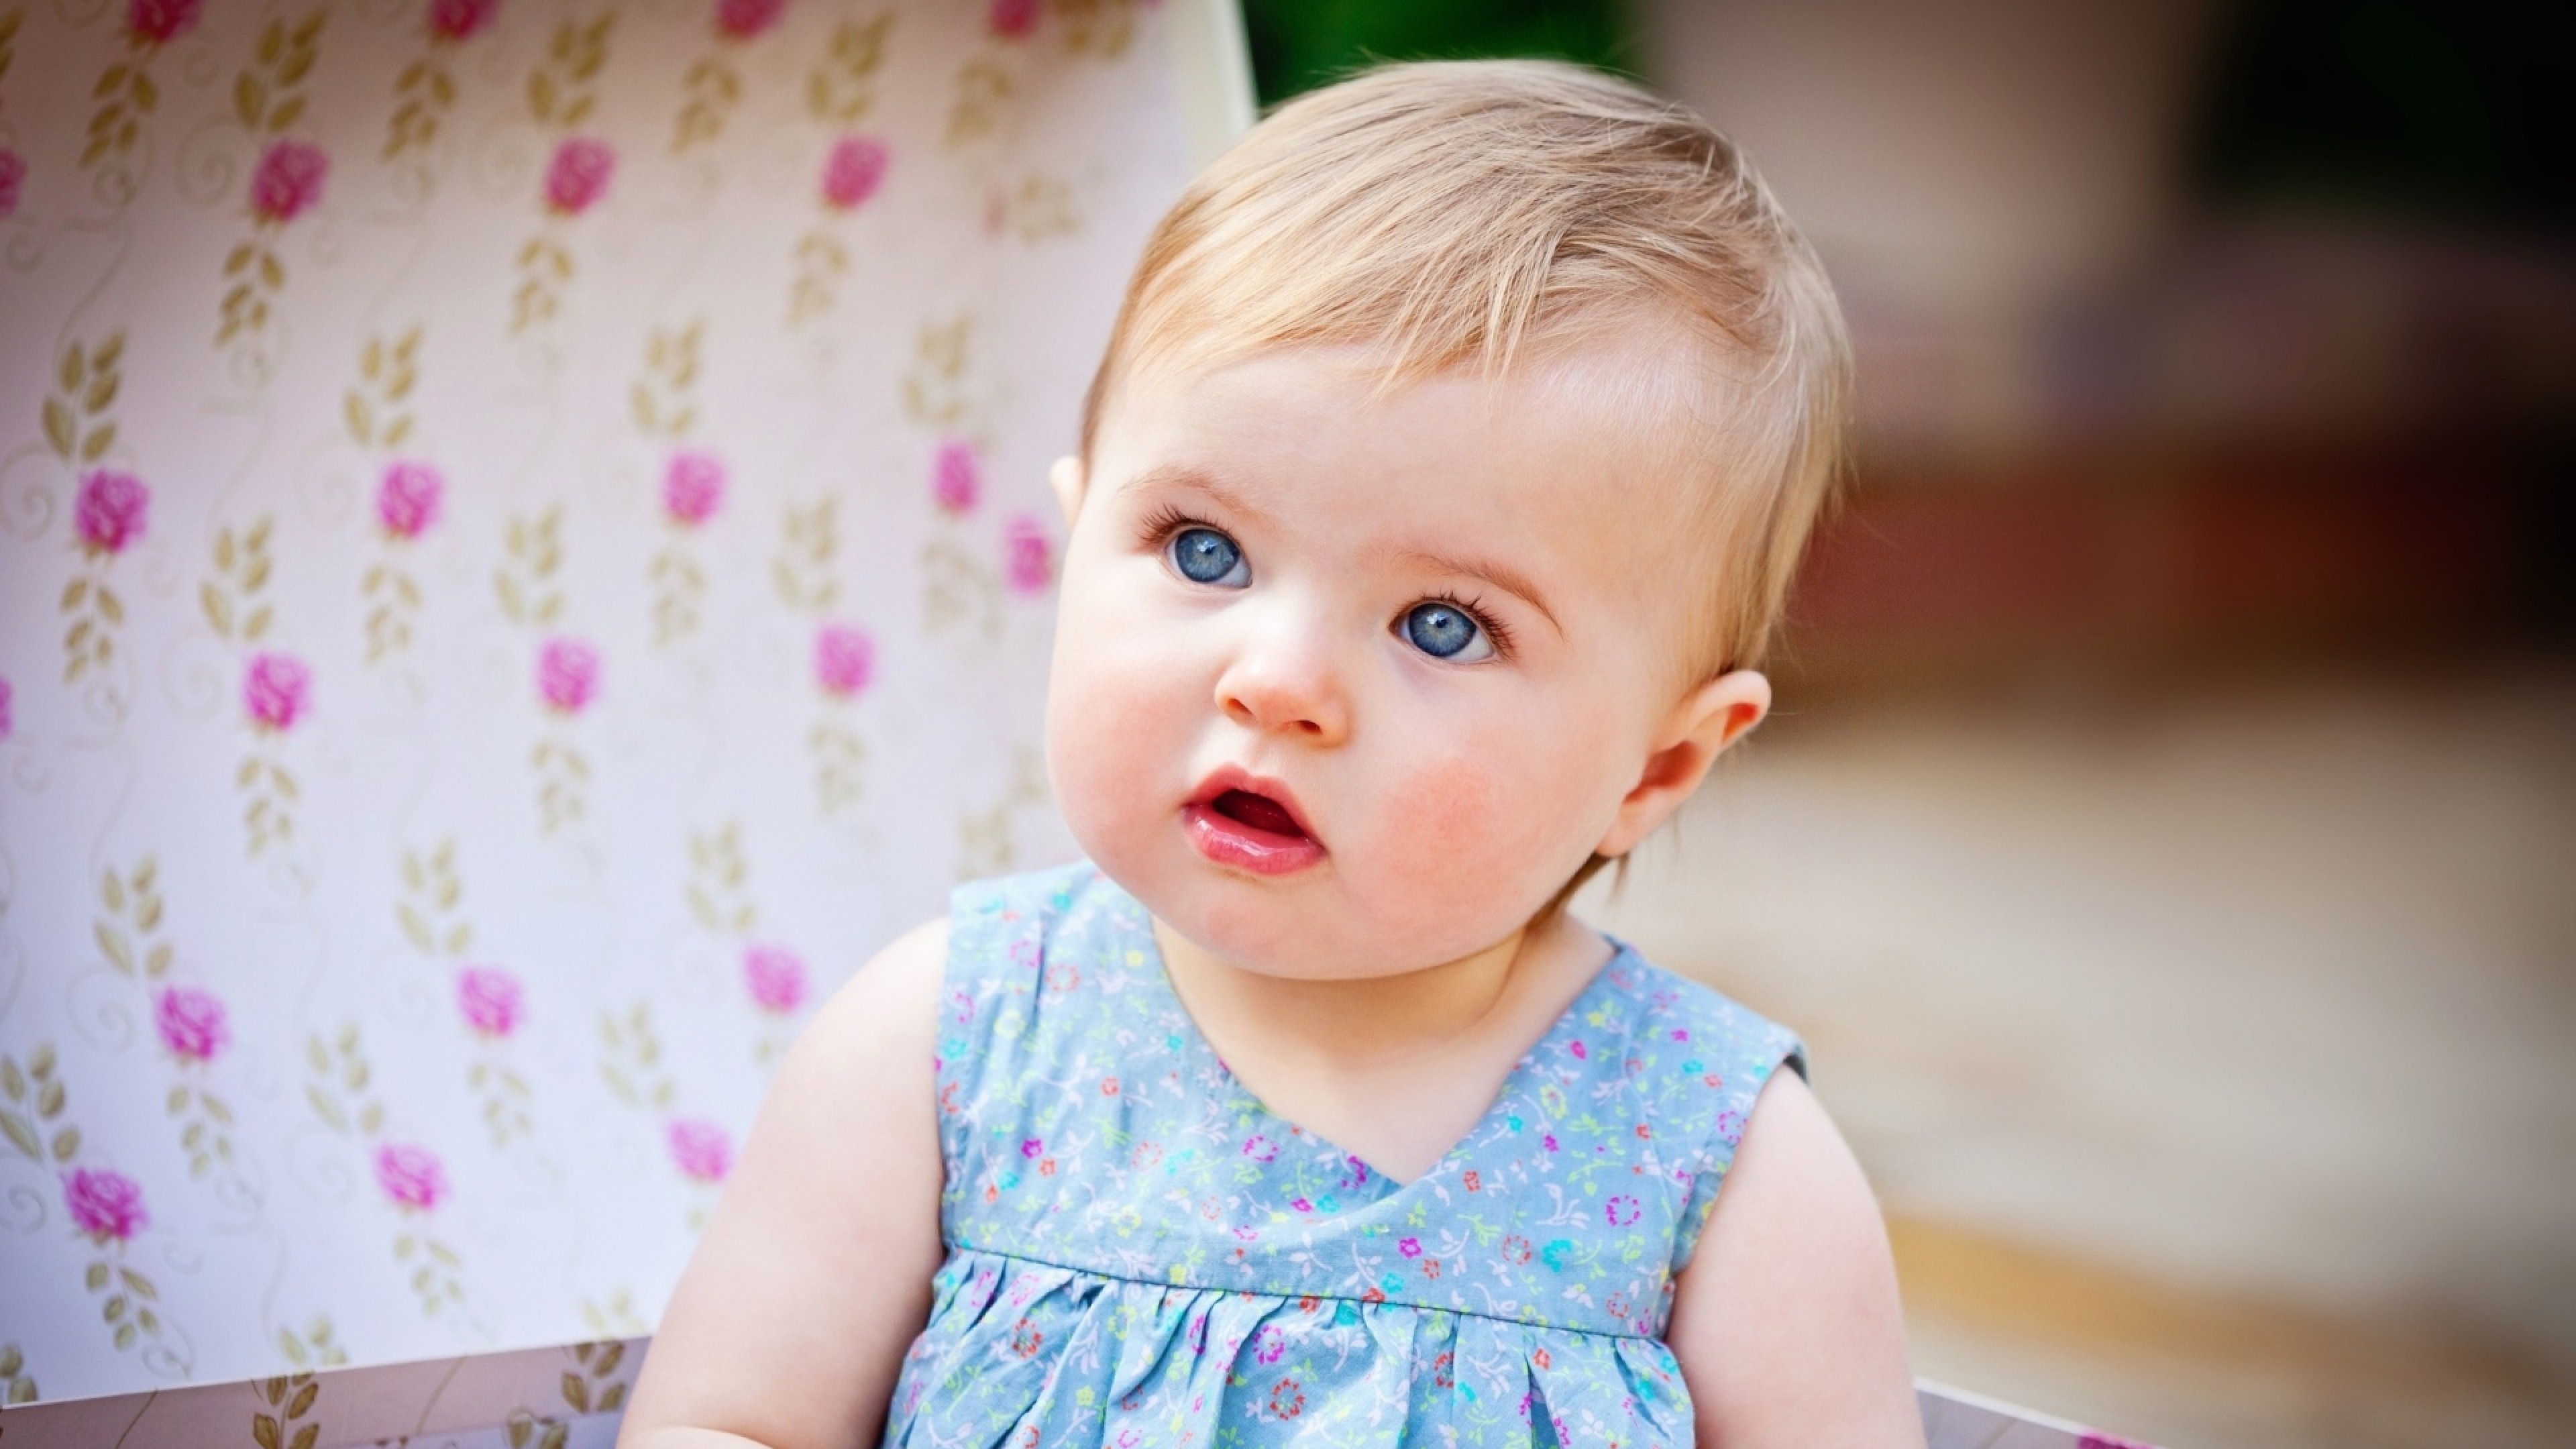 Desktop For Cute Little Babies Hd New Images Of Small Mobile Baby ...